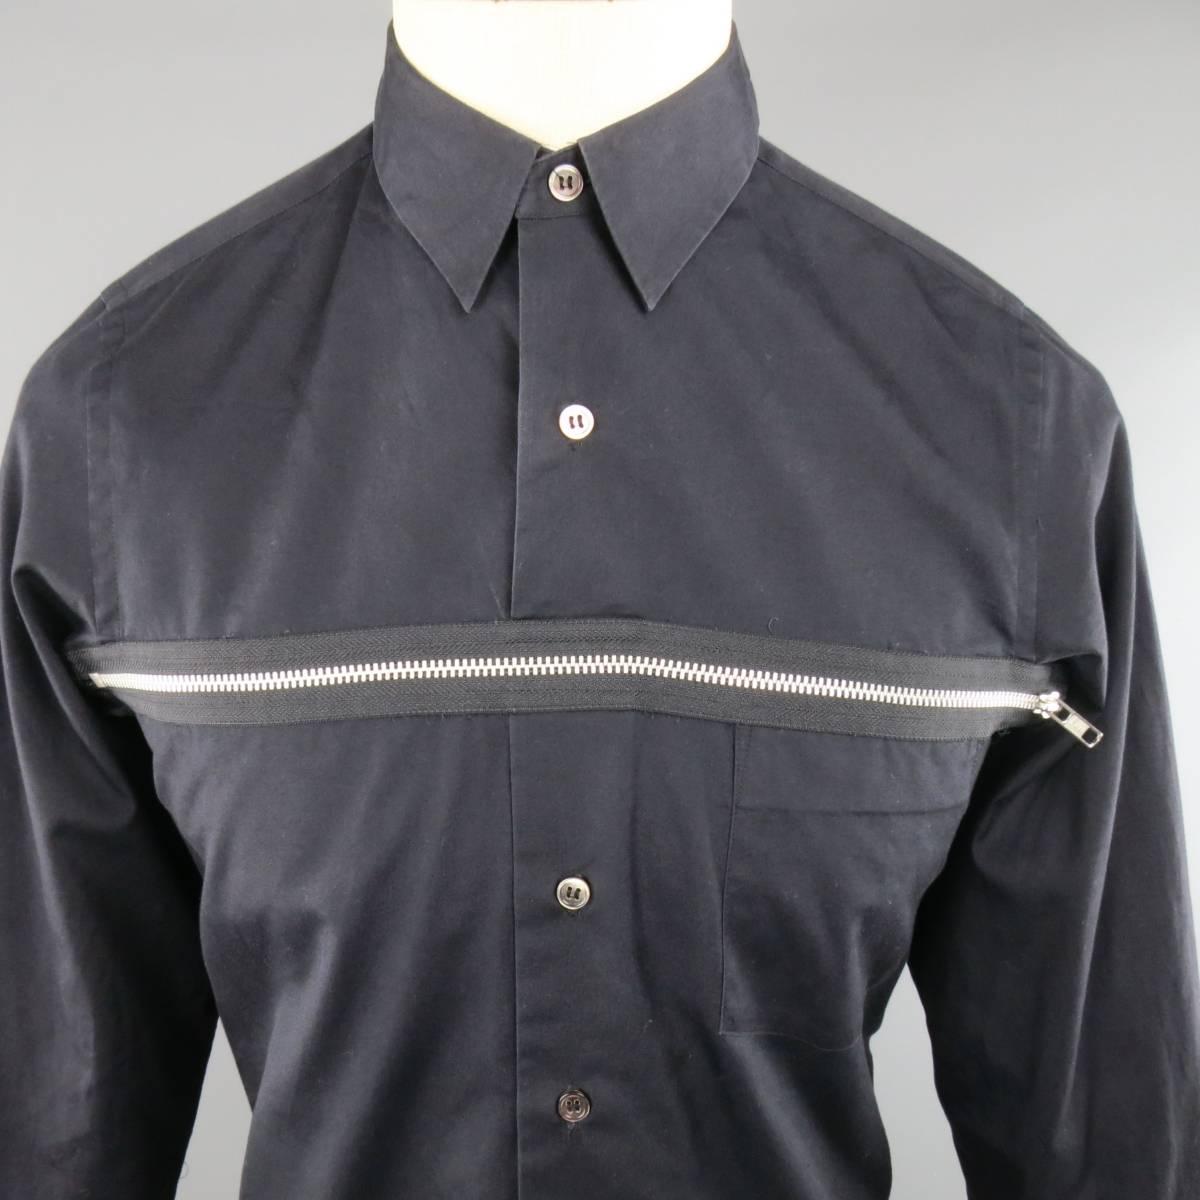 COMME DES GARCONS shirt in a black cotton featuring a pointed collar, button up front, and zip across detail. Made in Japan.
 
Good Pre-Owned Condition.
Marked: S (AD 2000)
 
Measurements:
 
Shoulder: 15 in.
Chest: 40 in.
Sleeve: 23 in.
Length: 26